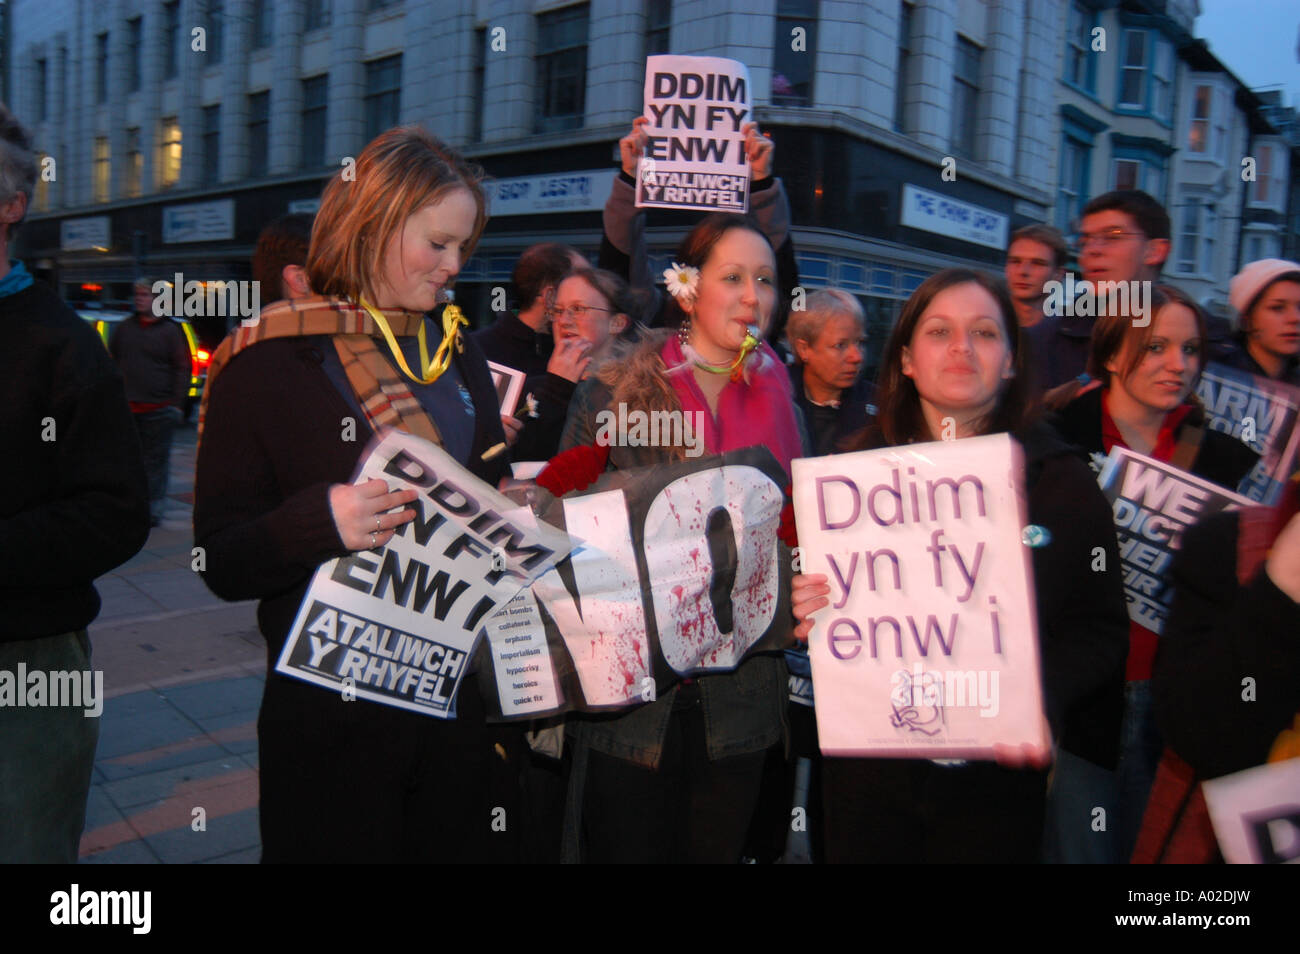 ddim yn fy enw i welsh for 'not in my name' women protesters against the Iraq war 2003 Aberystwyth Ceredigion wales UK Stock Photo